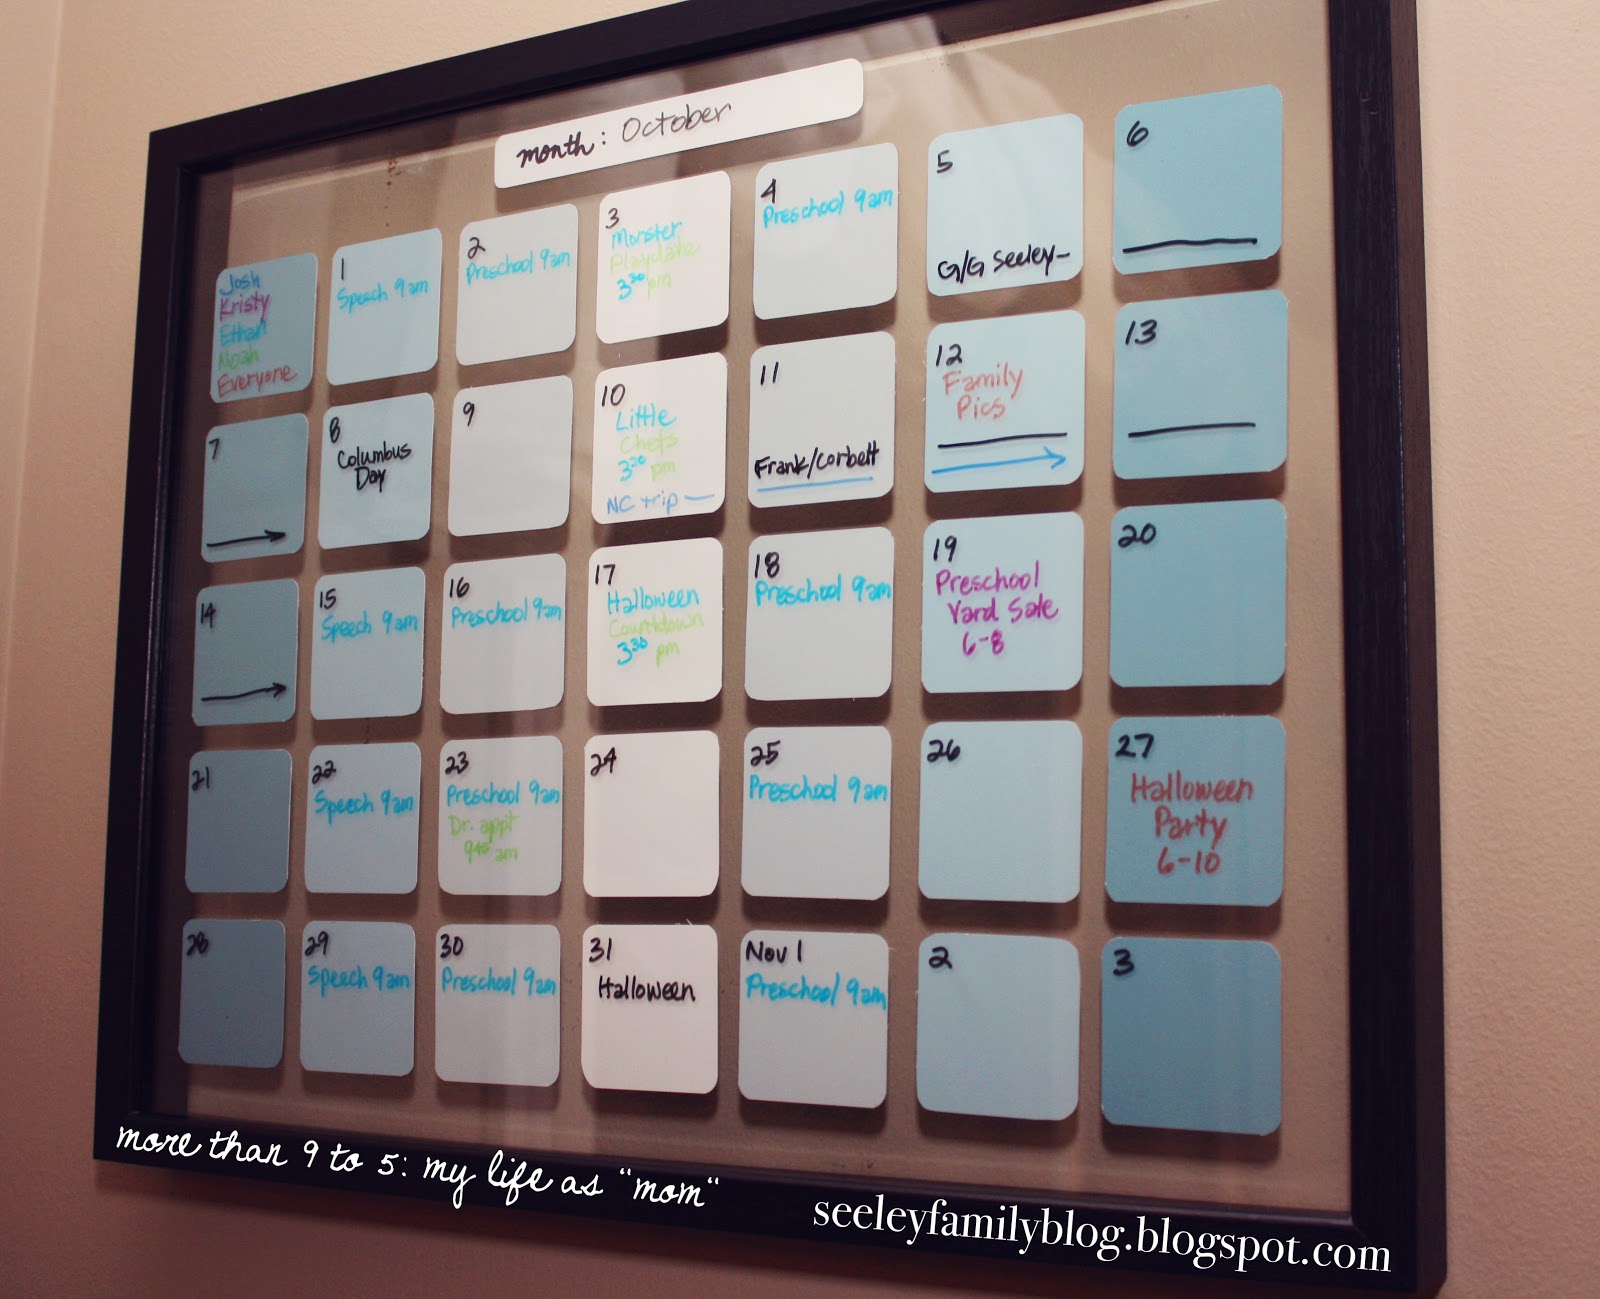 more than 9 to 5...my life as "Mom" DIY Paint Chip Wall Calendar